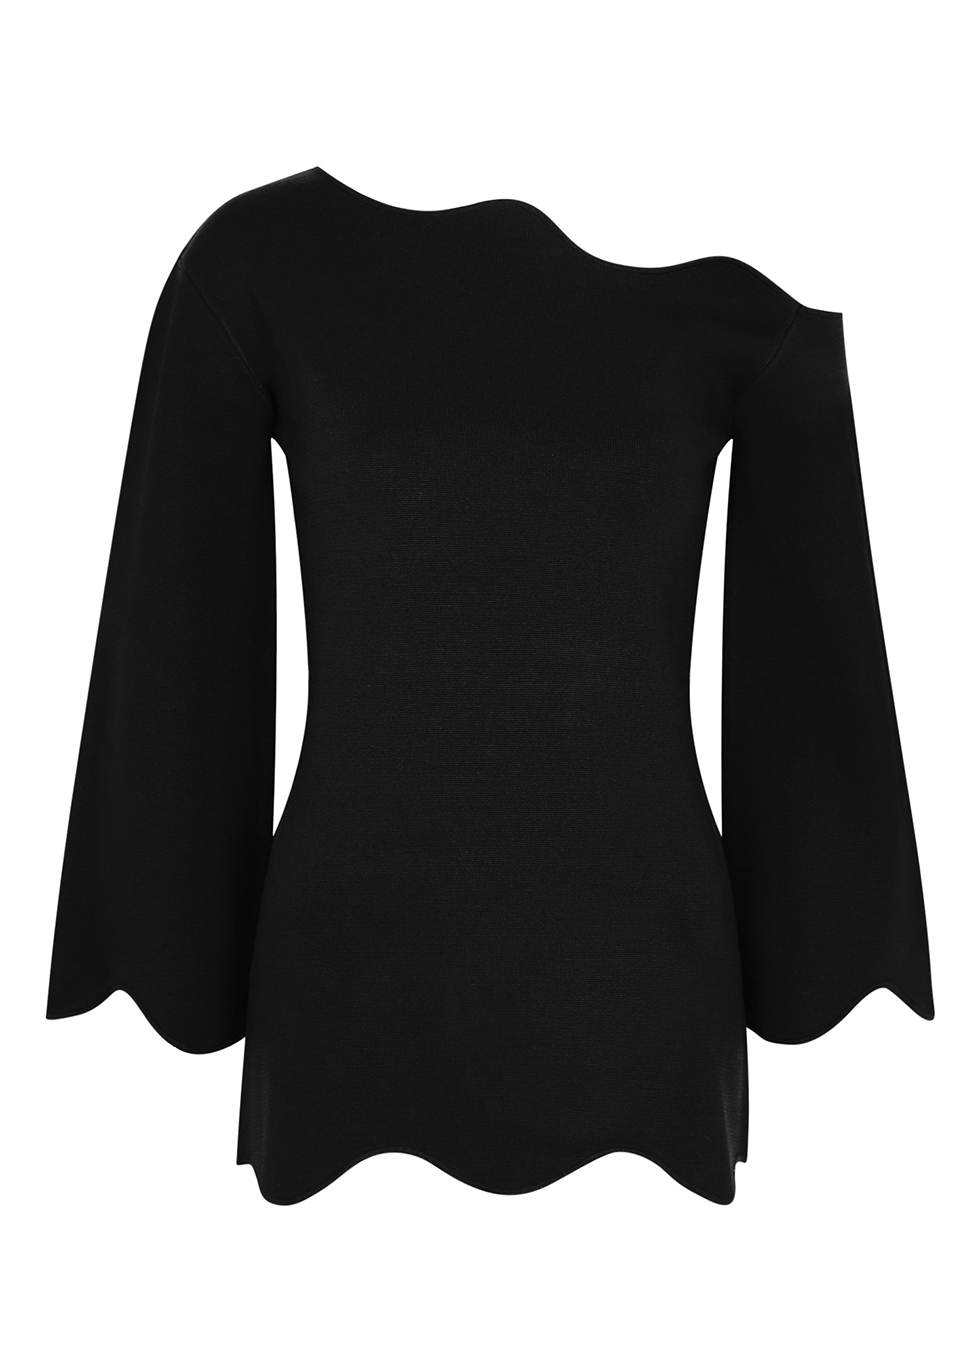 BY MALENE BIRGER Vikie black scalloped knitted top